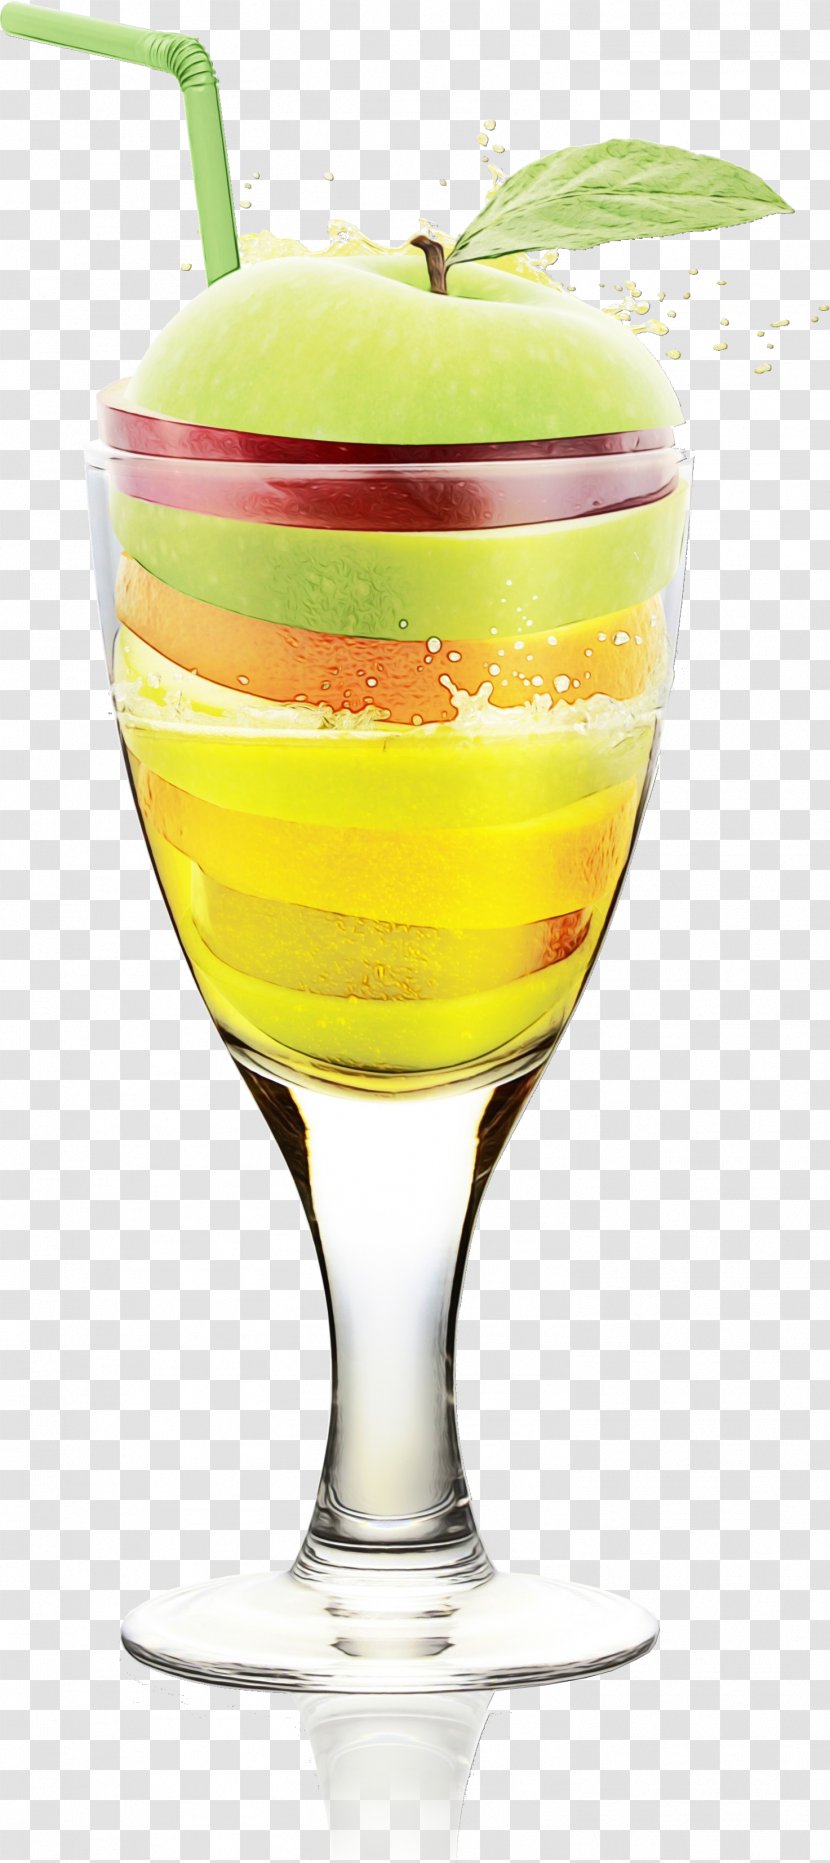 Wine Glass - Cocktail Champagne Stemware Transparent PNG